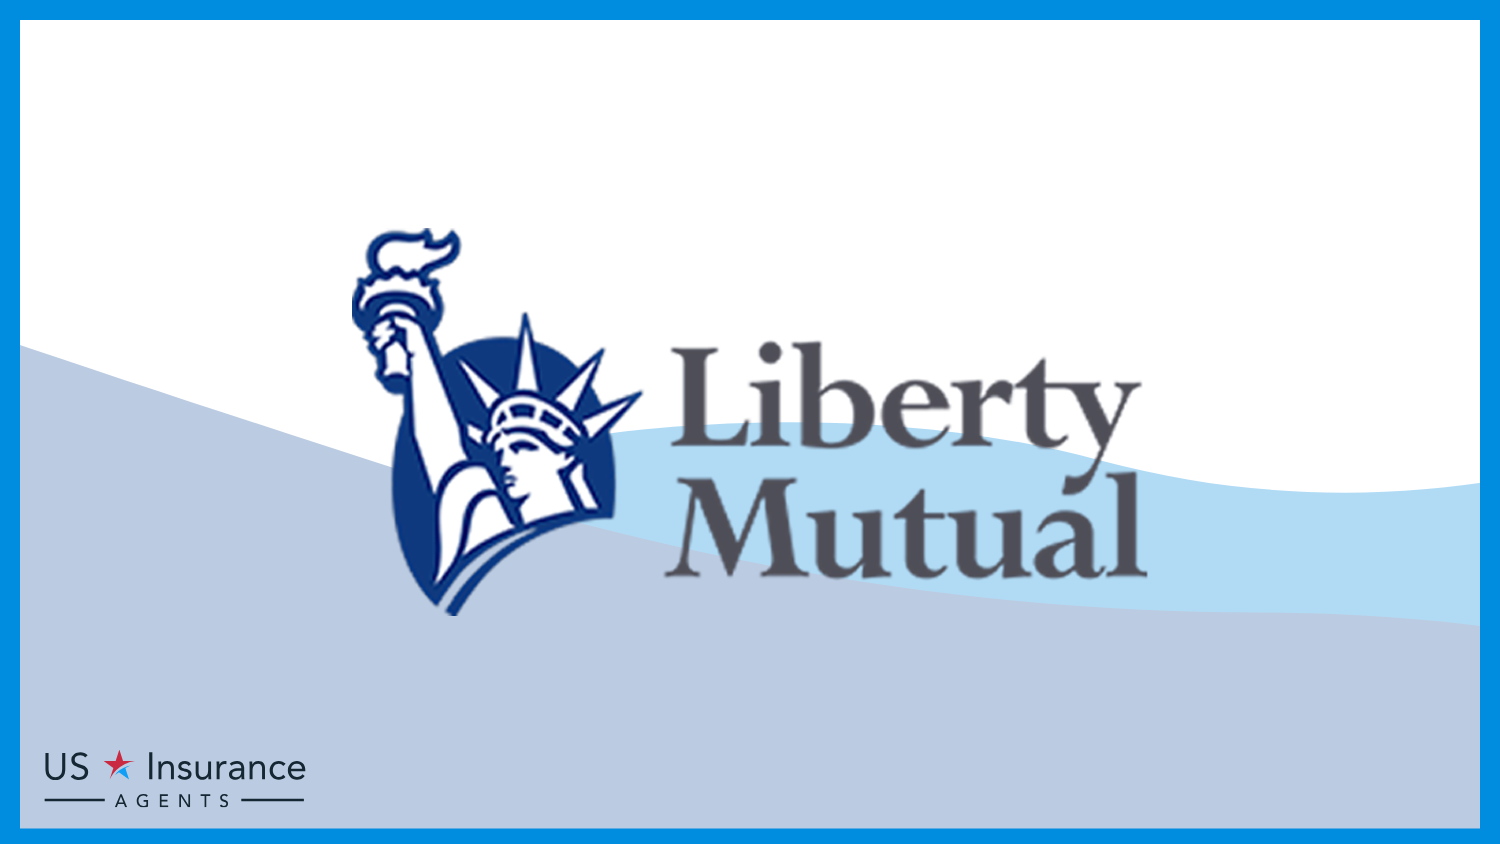 Liberty Mutual: Best Business Insurance for Bodyguards